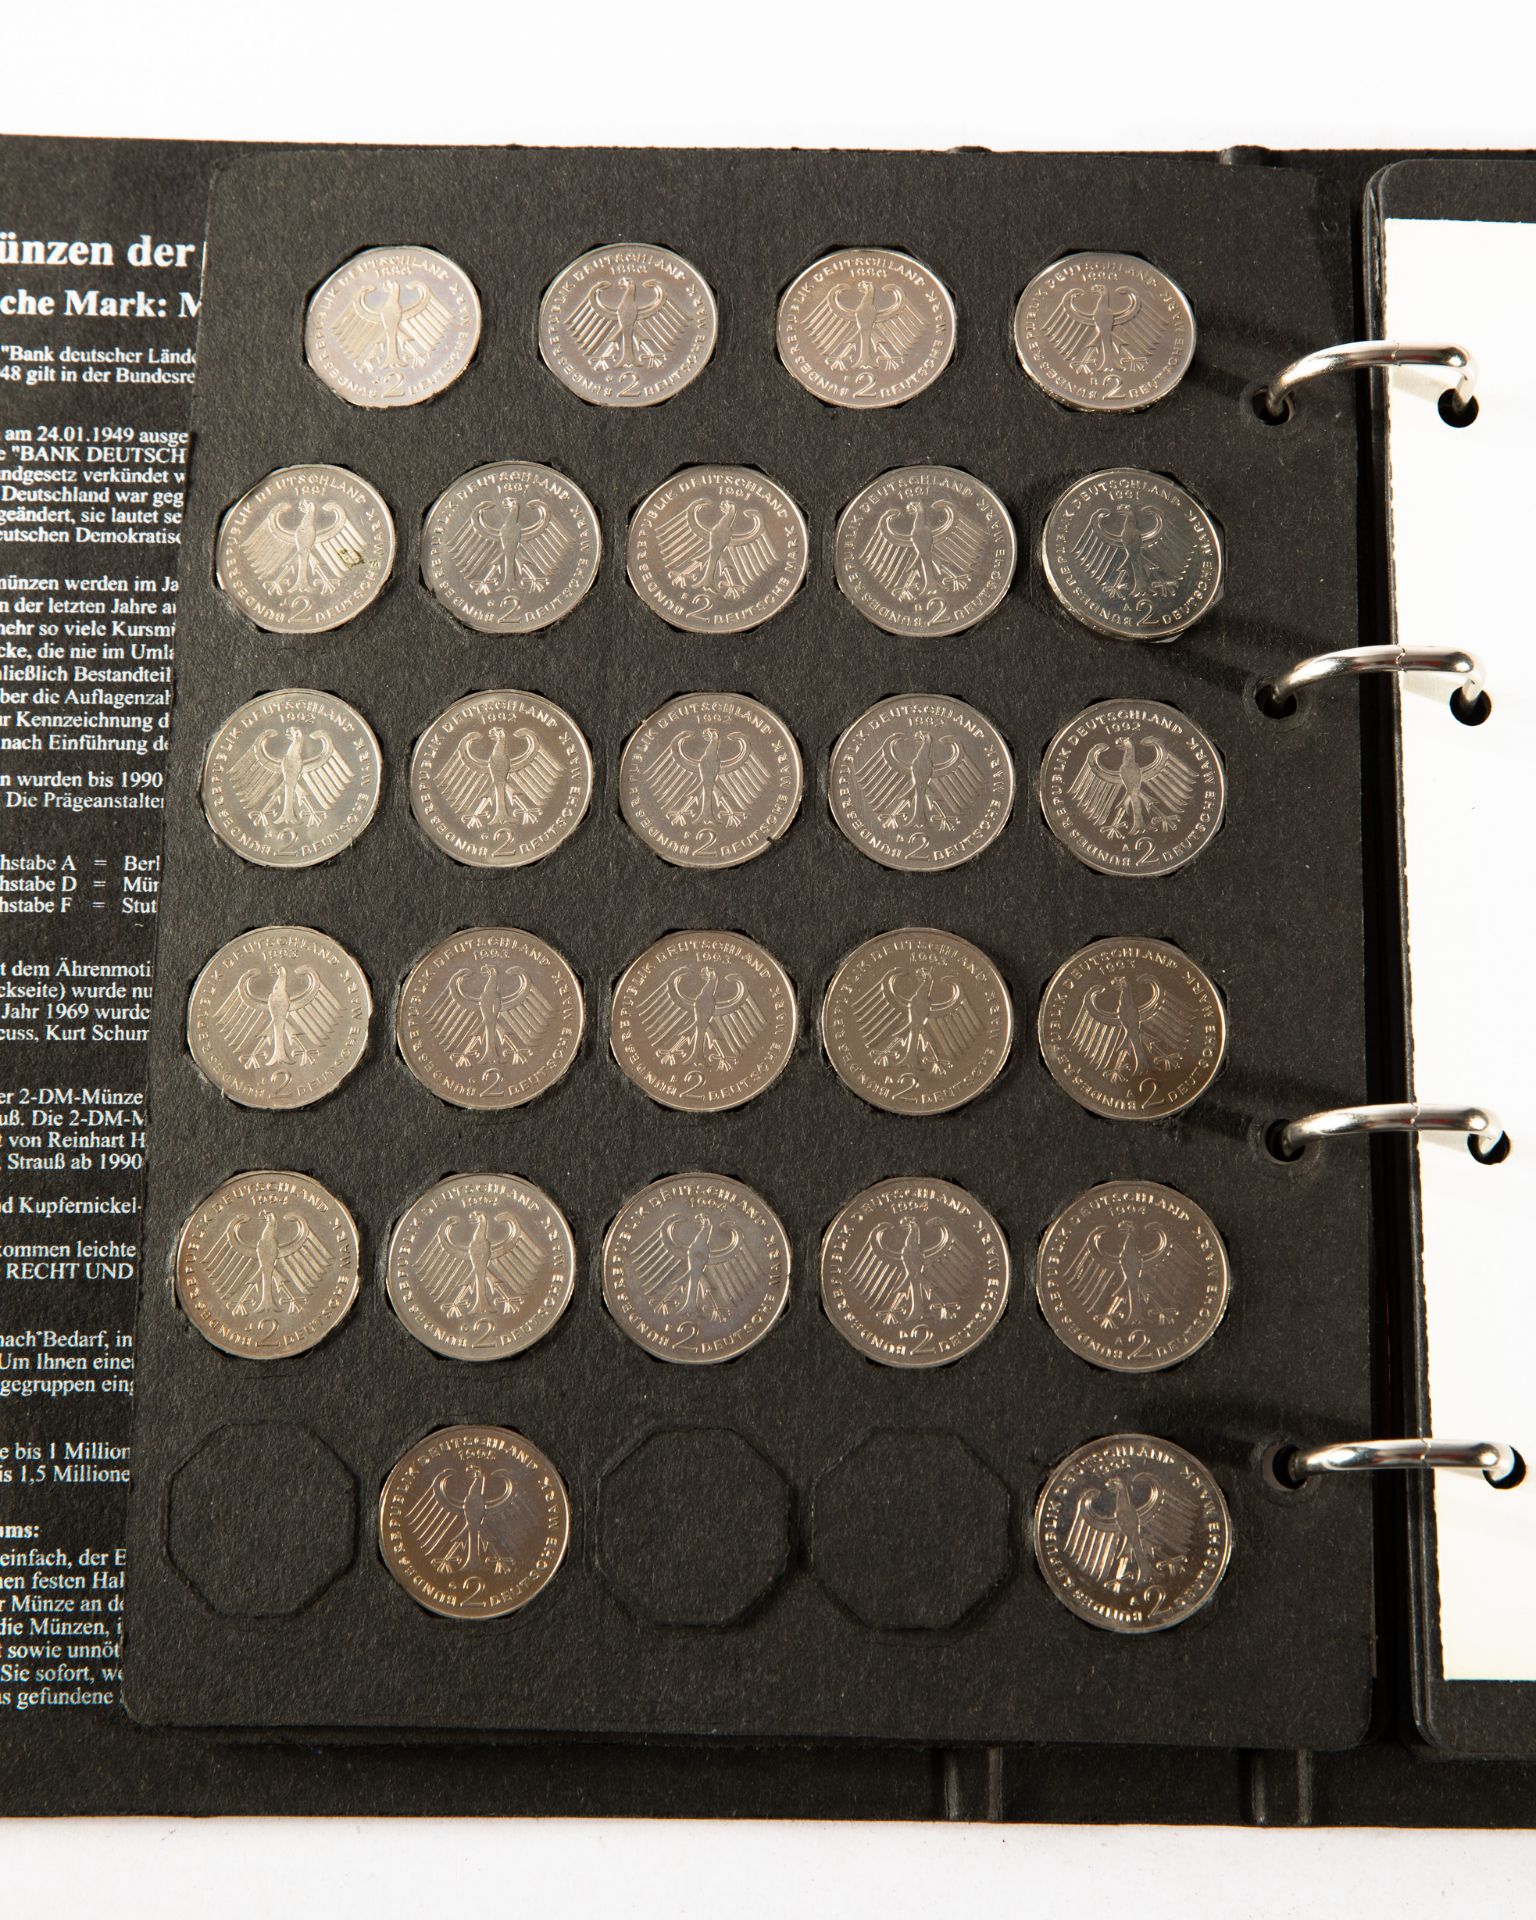 Germany - 2x full coin albums 2 DM Coins 1970-1996 - Image 29 of 33